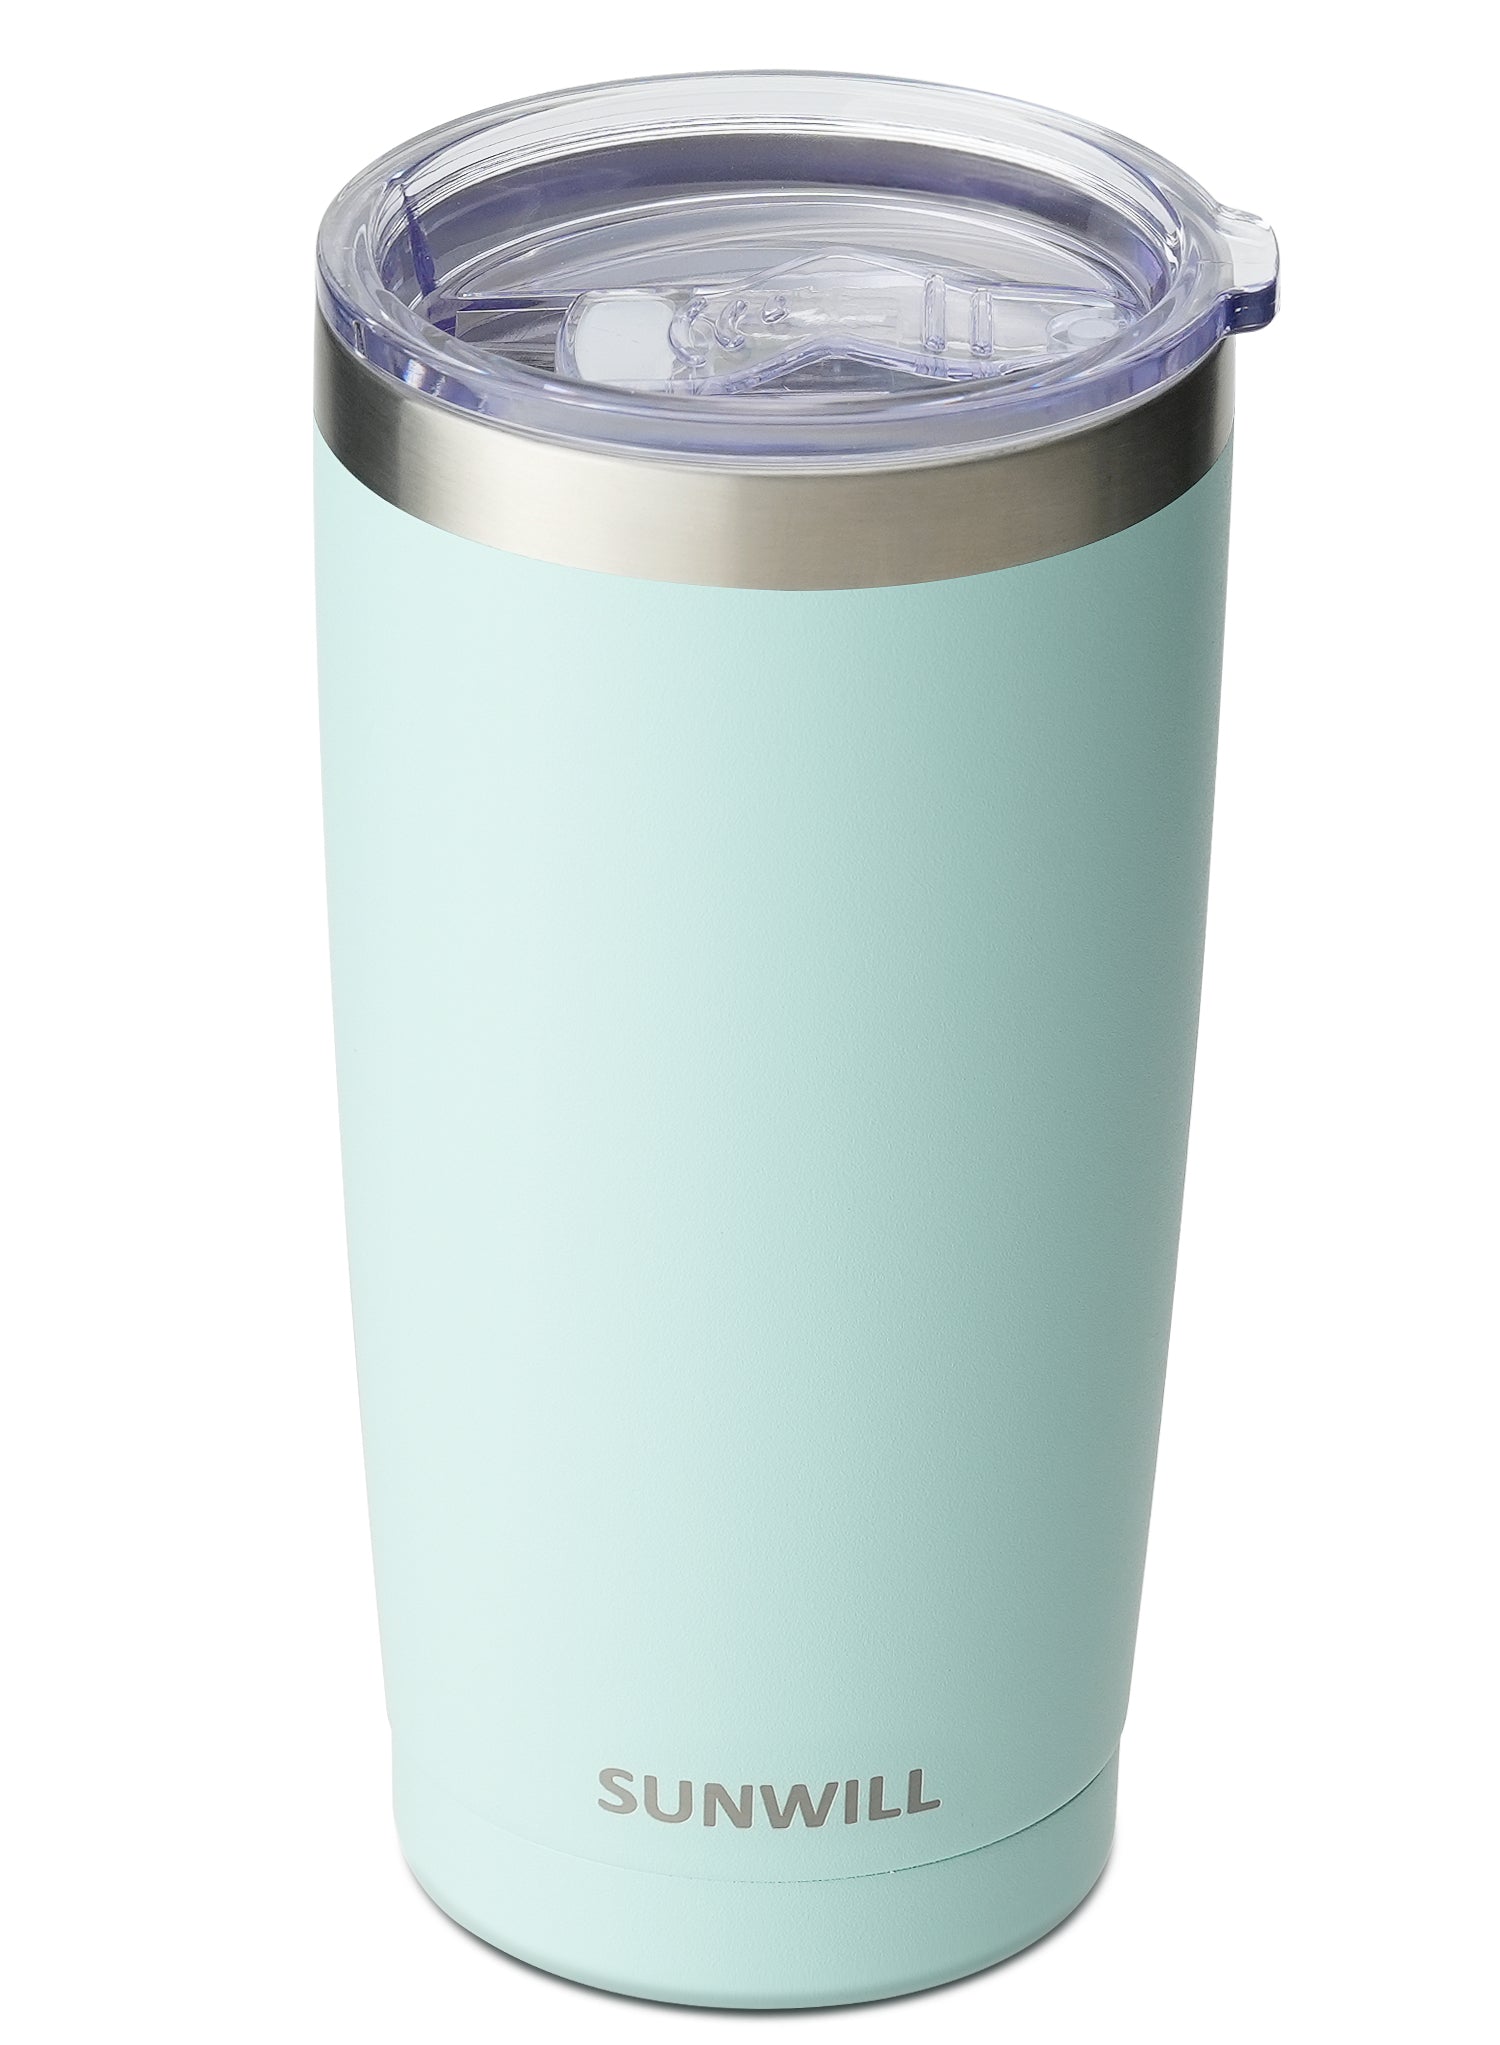 SUNWILL Coffee Travel Mug with Handle, Stainless Steel Insulated Cup Tumbler, 22oz, Powder Coated Mint, Size: 22 oz, White